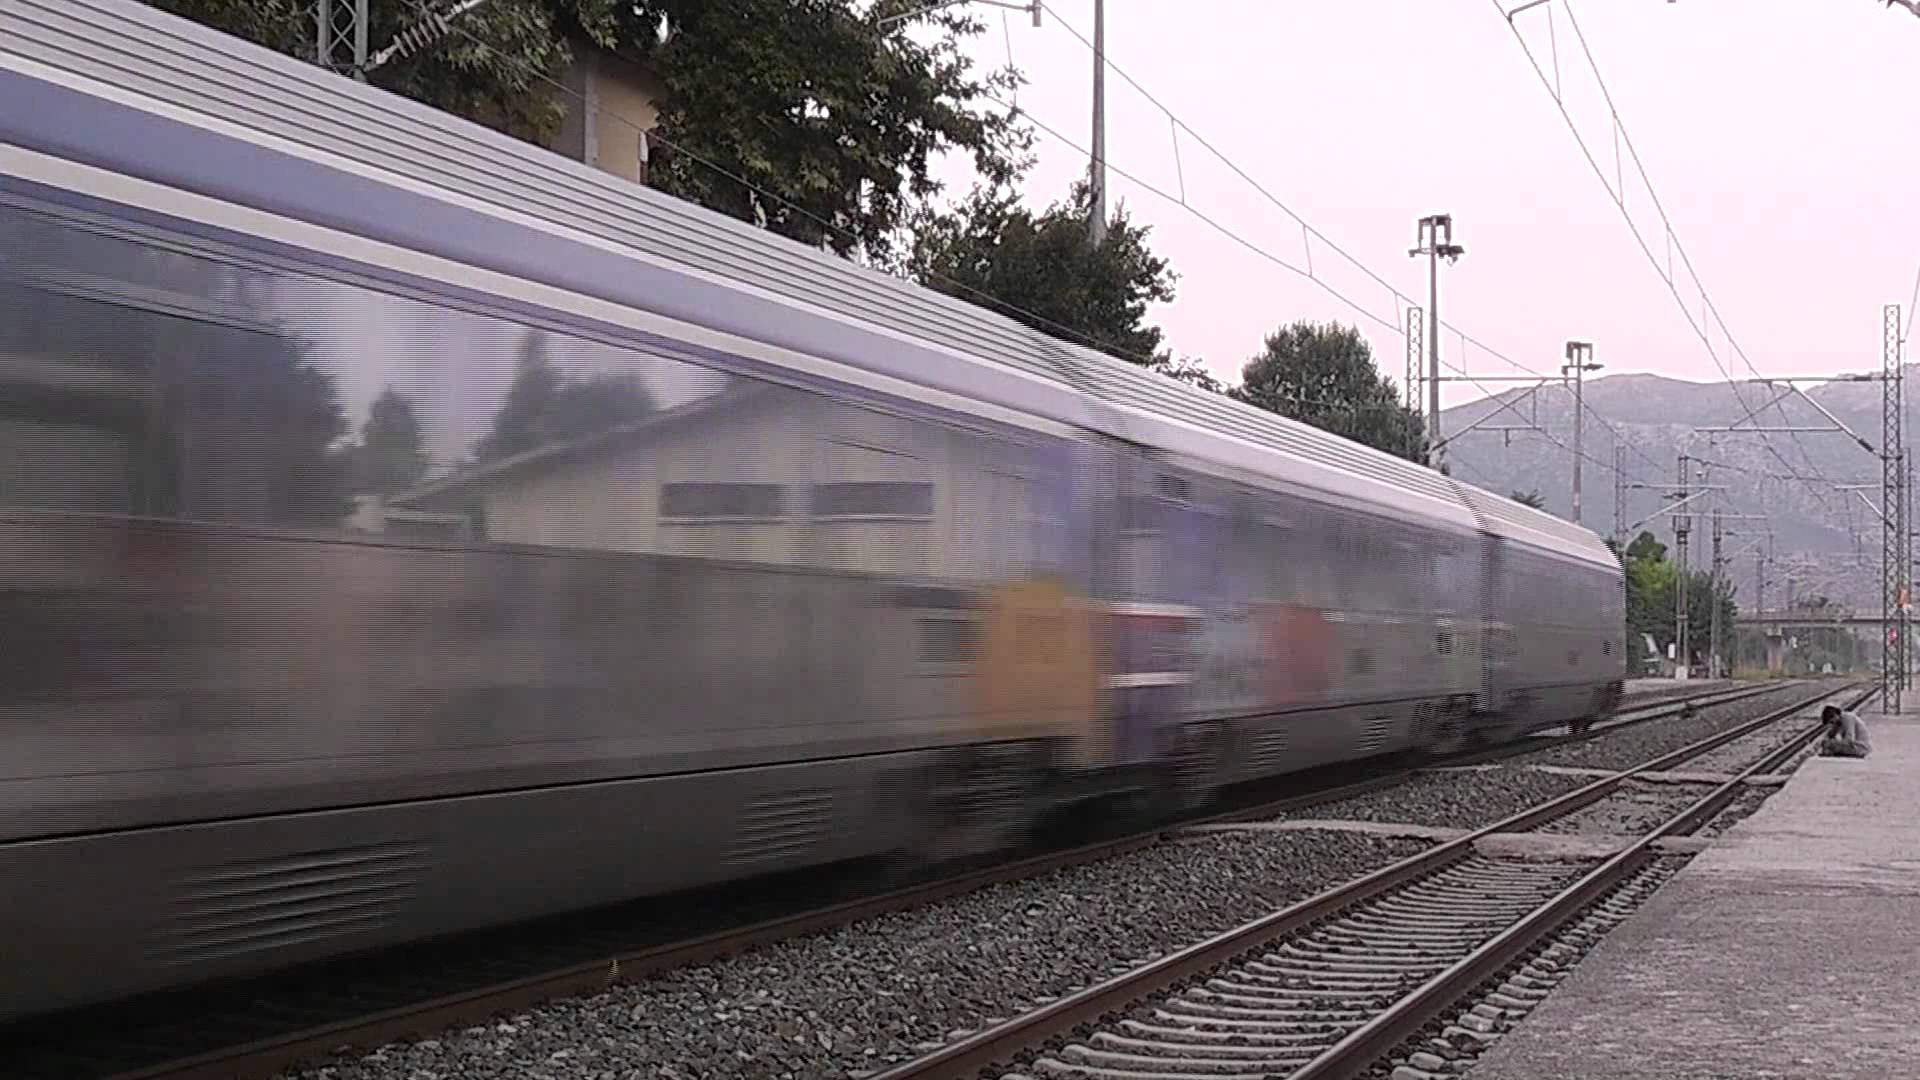 Two Intercity trains passing Aliartos station fast!! - YouTube